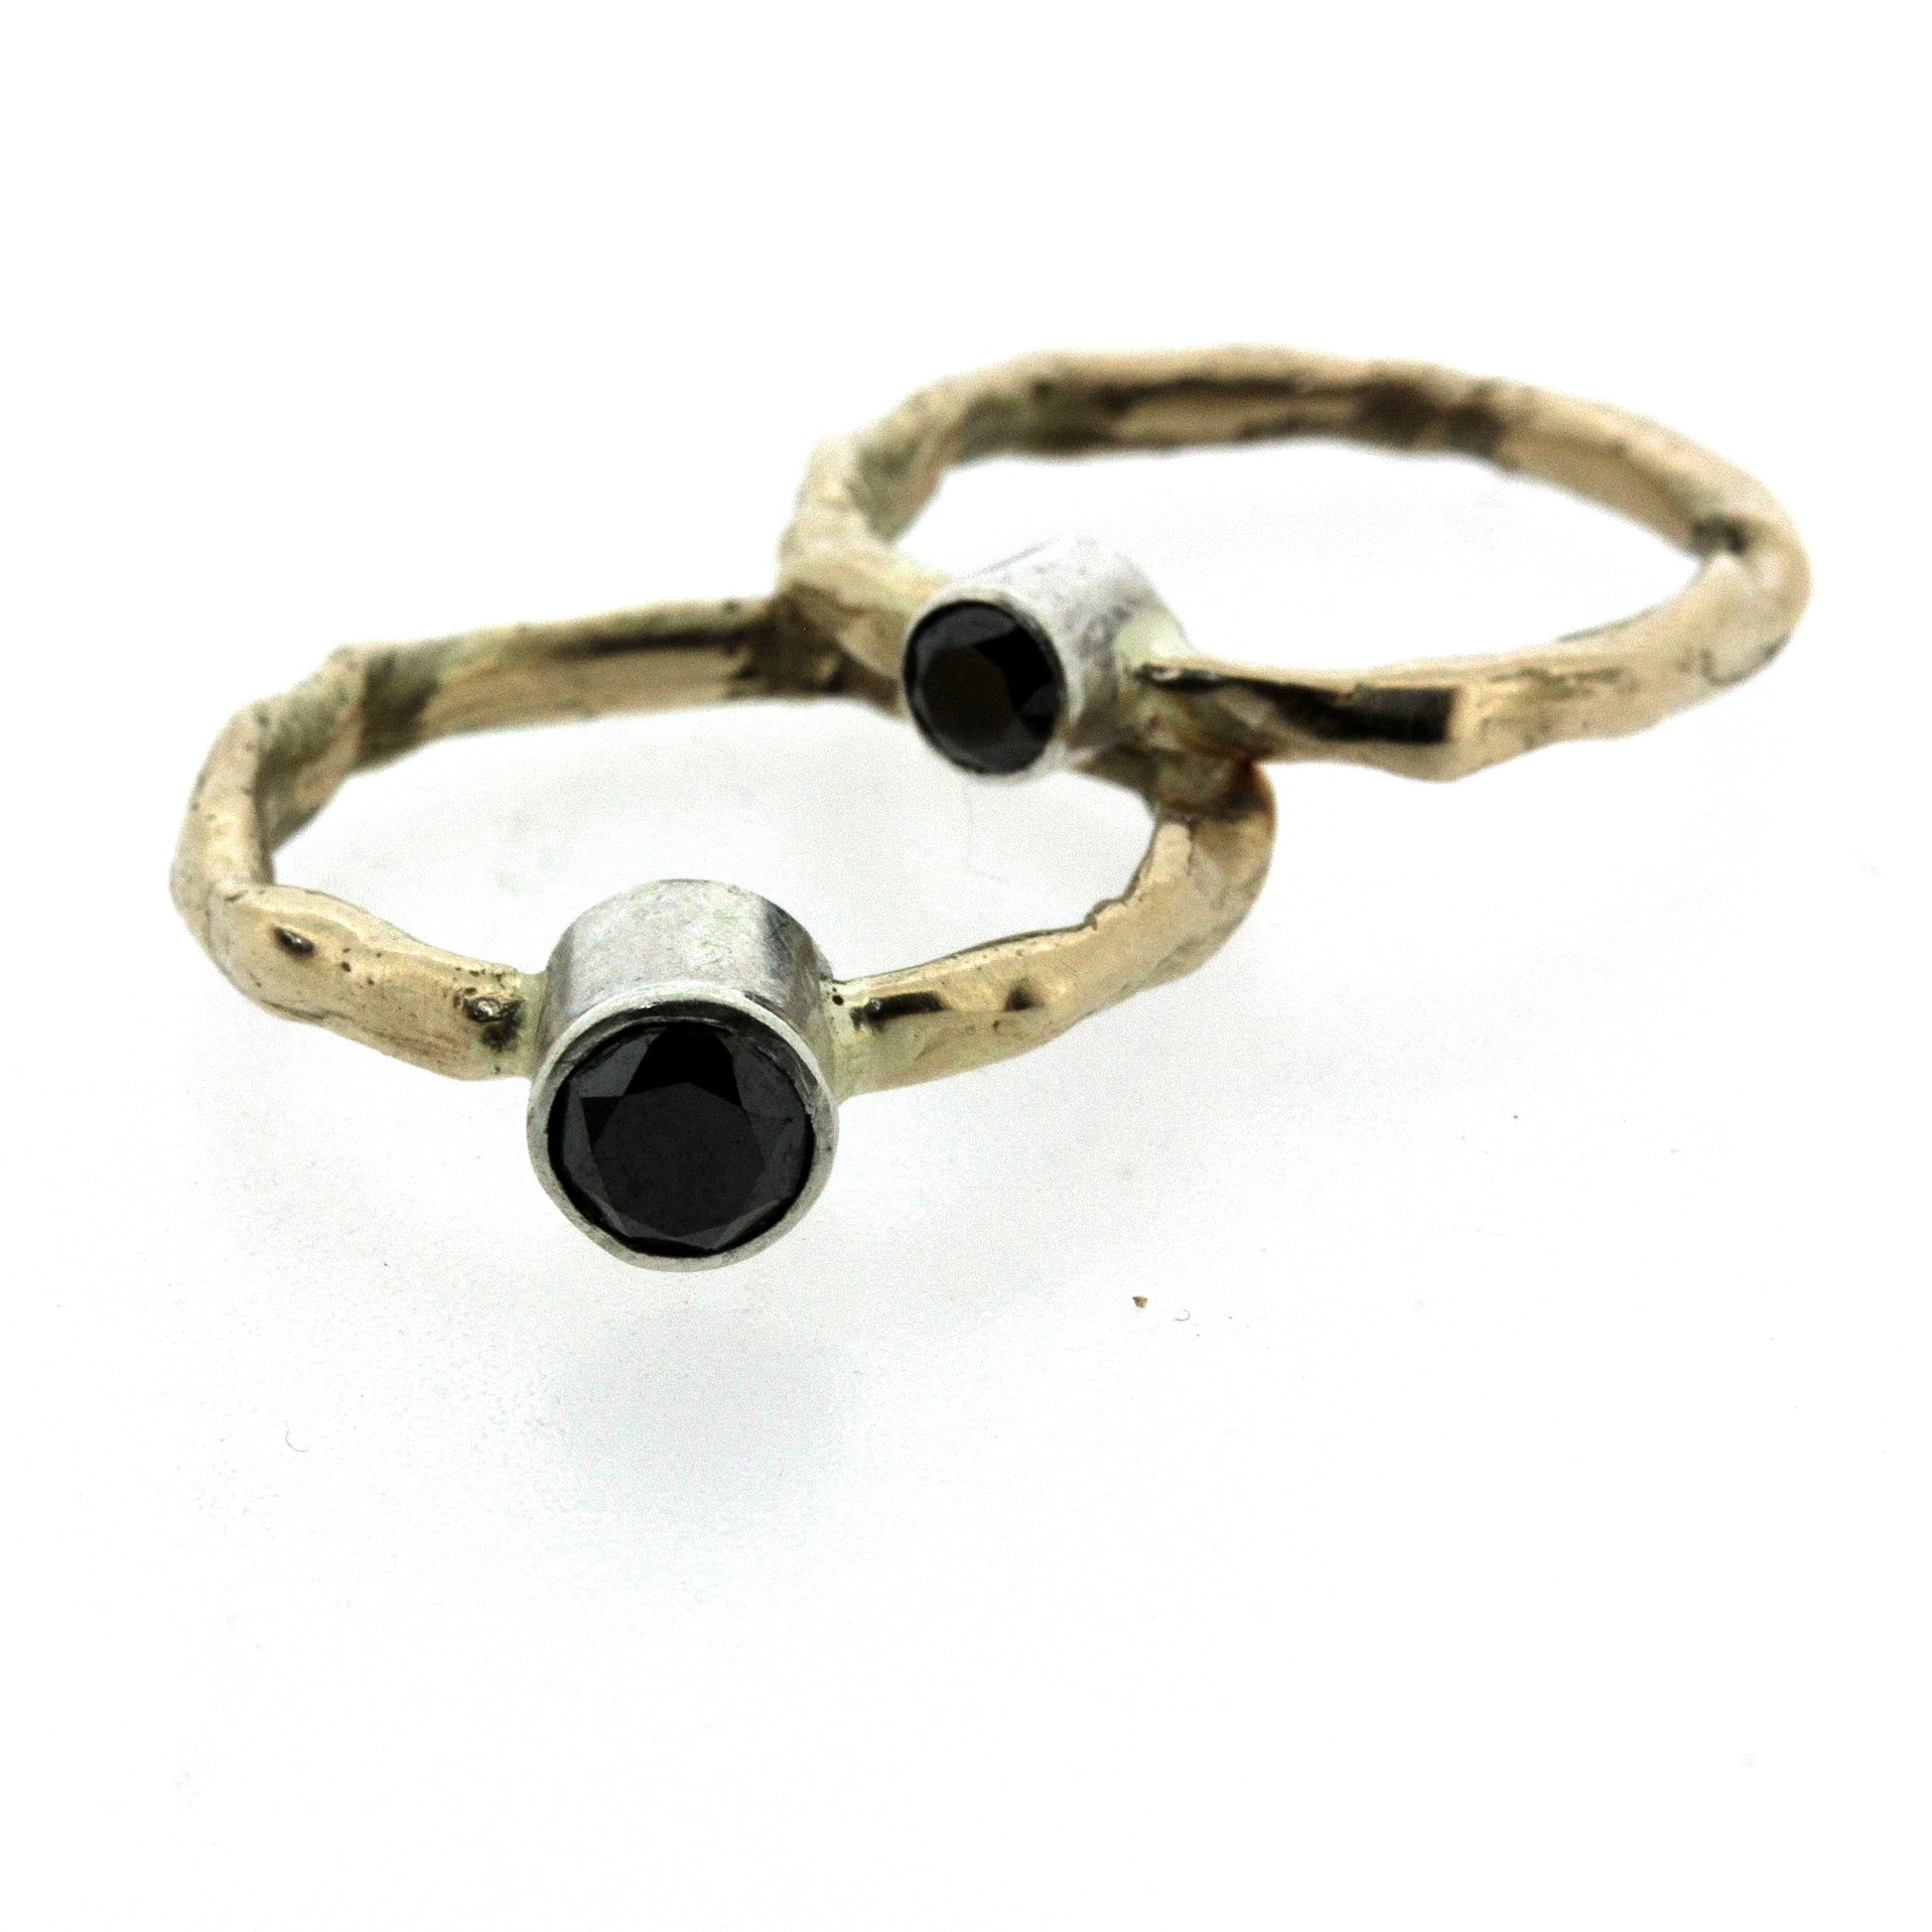 Full view of two Rita Rings stacked on top of one another. These rings have an organic gold band, a black diamond and a silver bezel surrounding the black diamond.